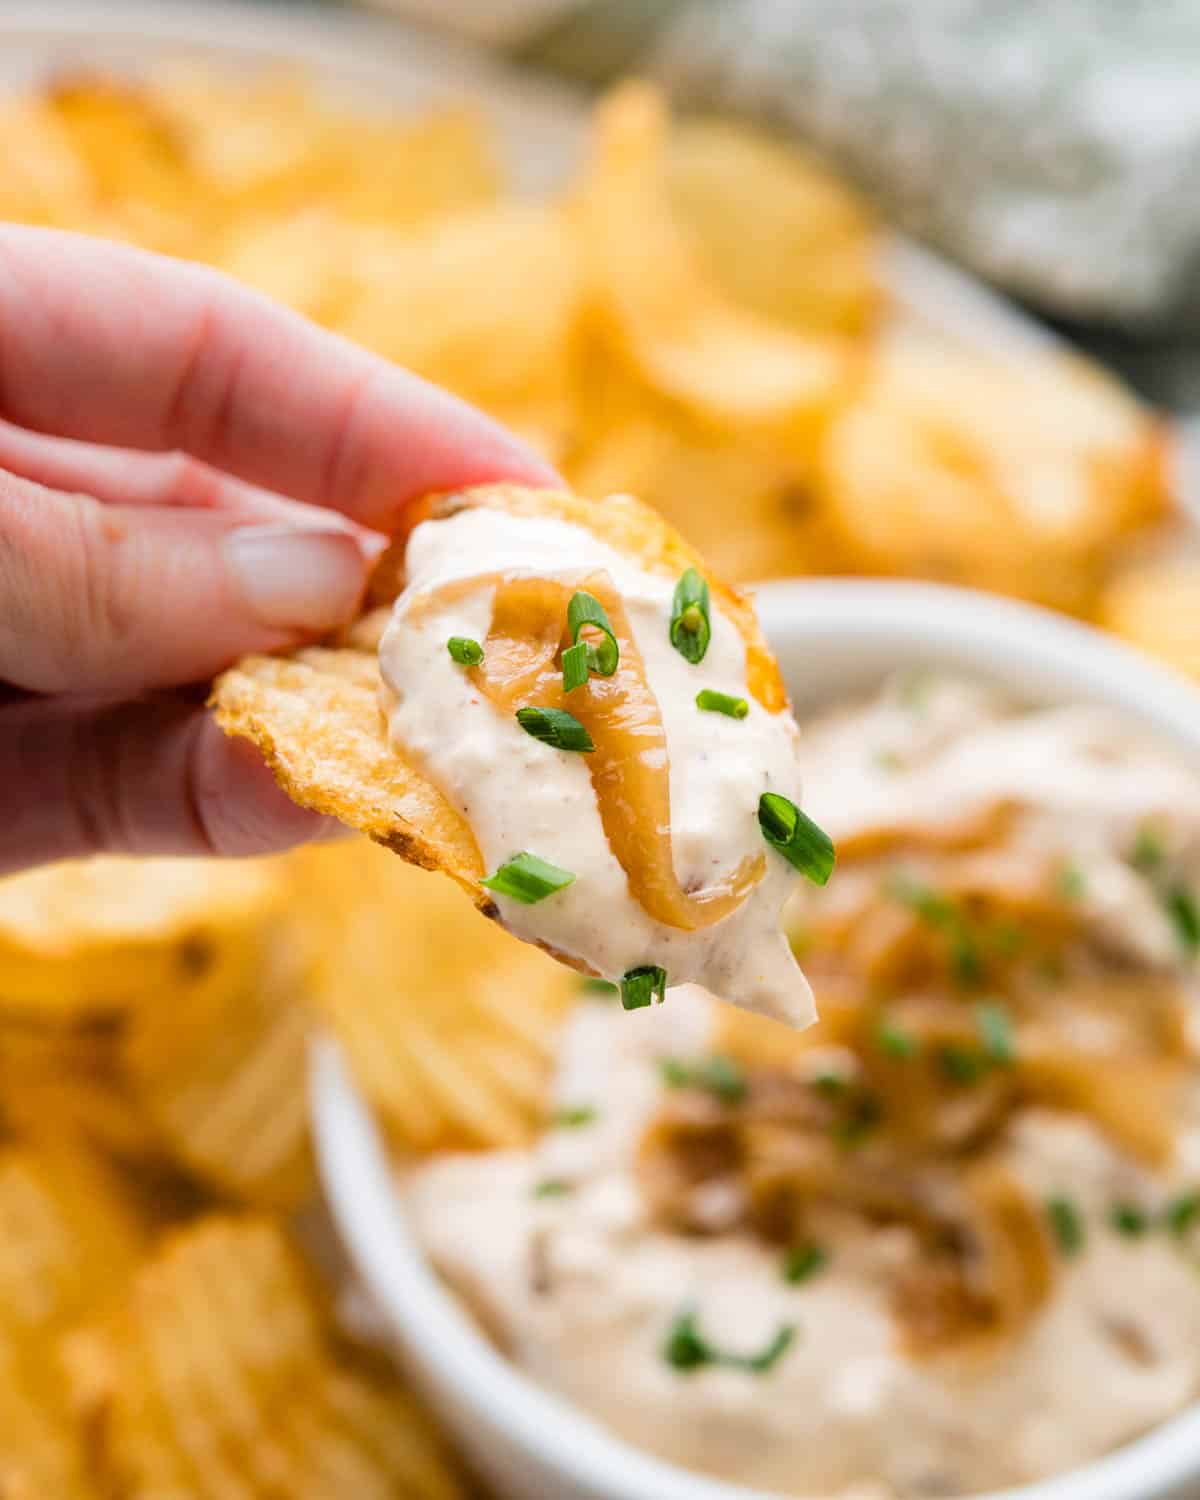 Holding a potato chip with sour cream and onion dip and a caramelized onion.